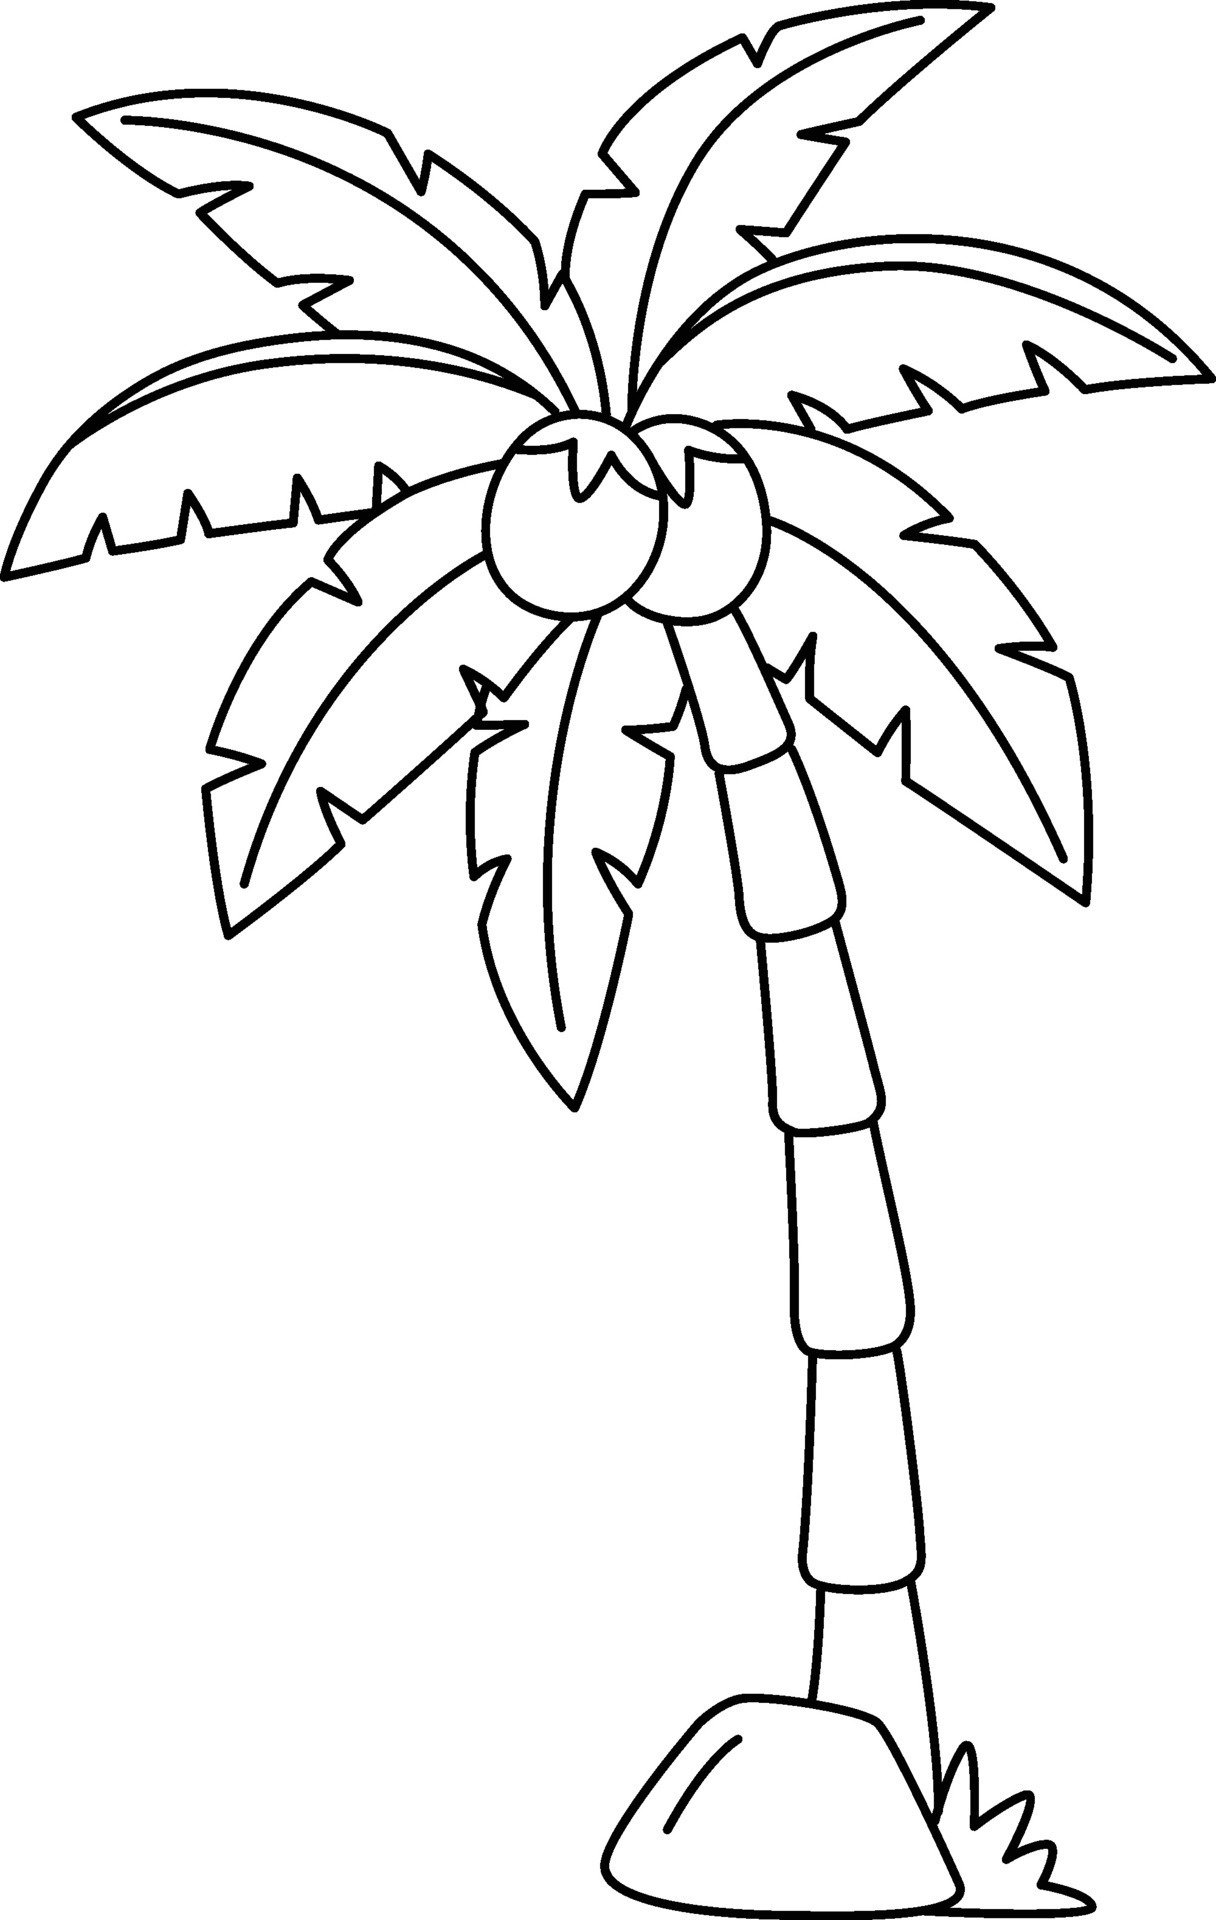 Coconut Tree Isolated Coloring Page for Kids 26493201 Vector Art at ...